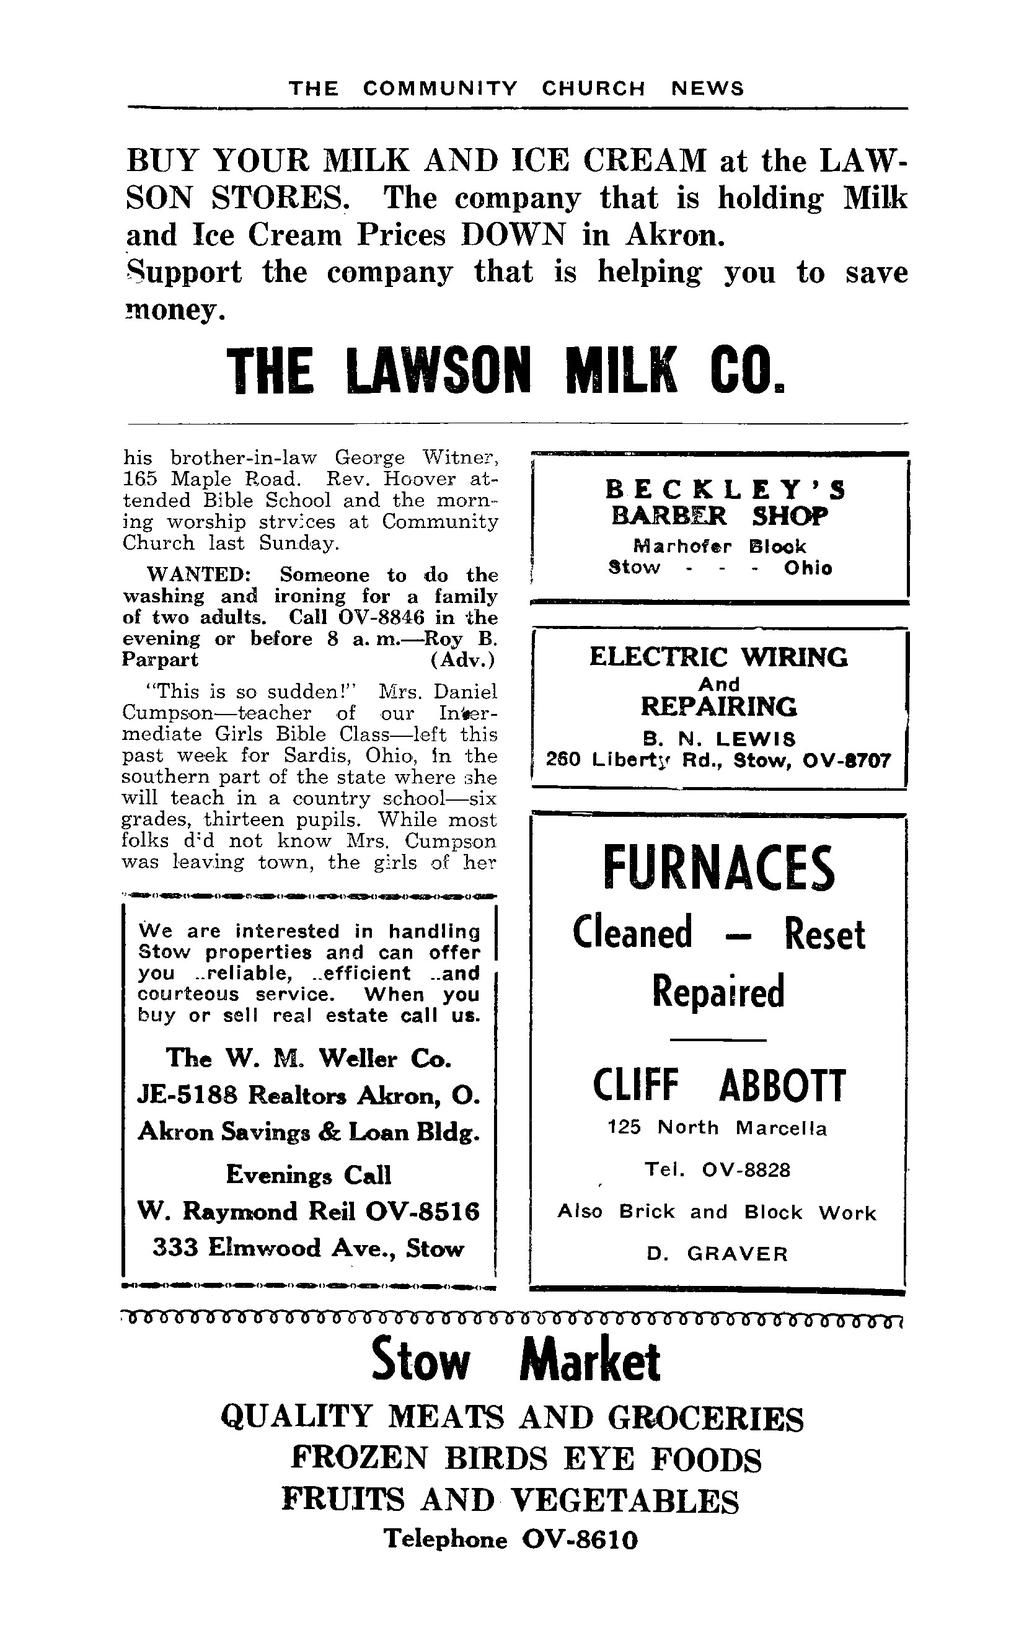 373 THE COMMUNITY CHURCH NEWS BUY YOUR MILK AND ICE CREAM at the LAW- SON STORES. The company that is holding Milk and Ice Cream Prices DOWN in Akron.